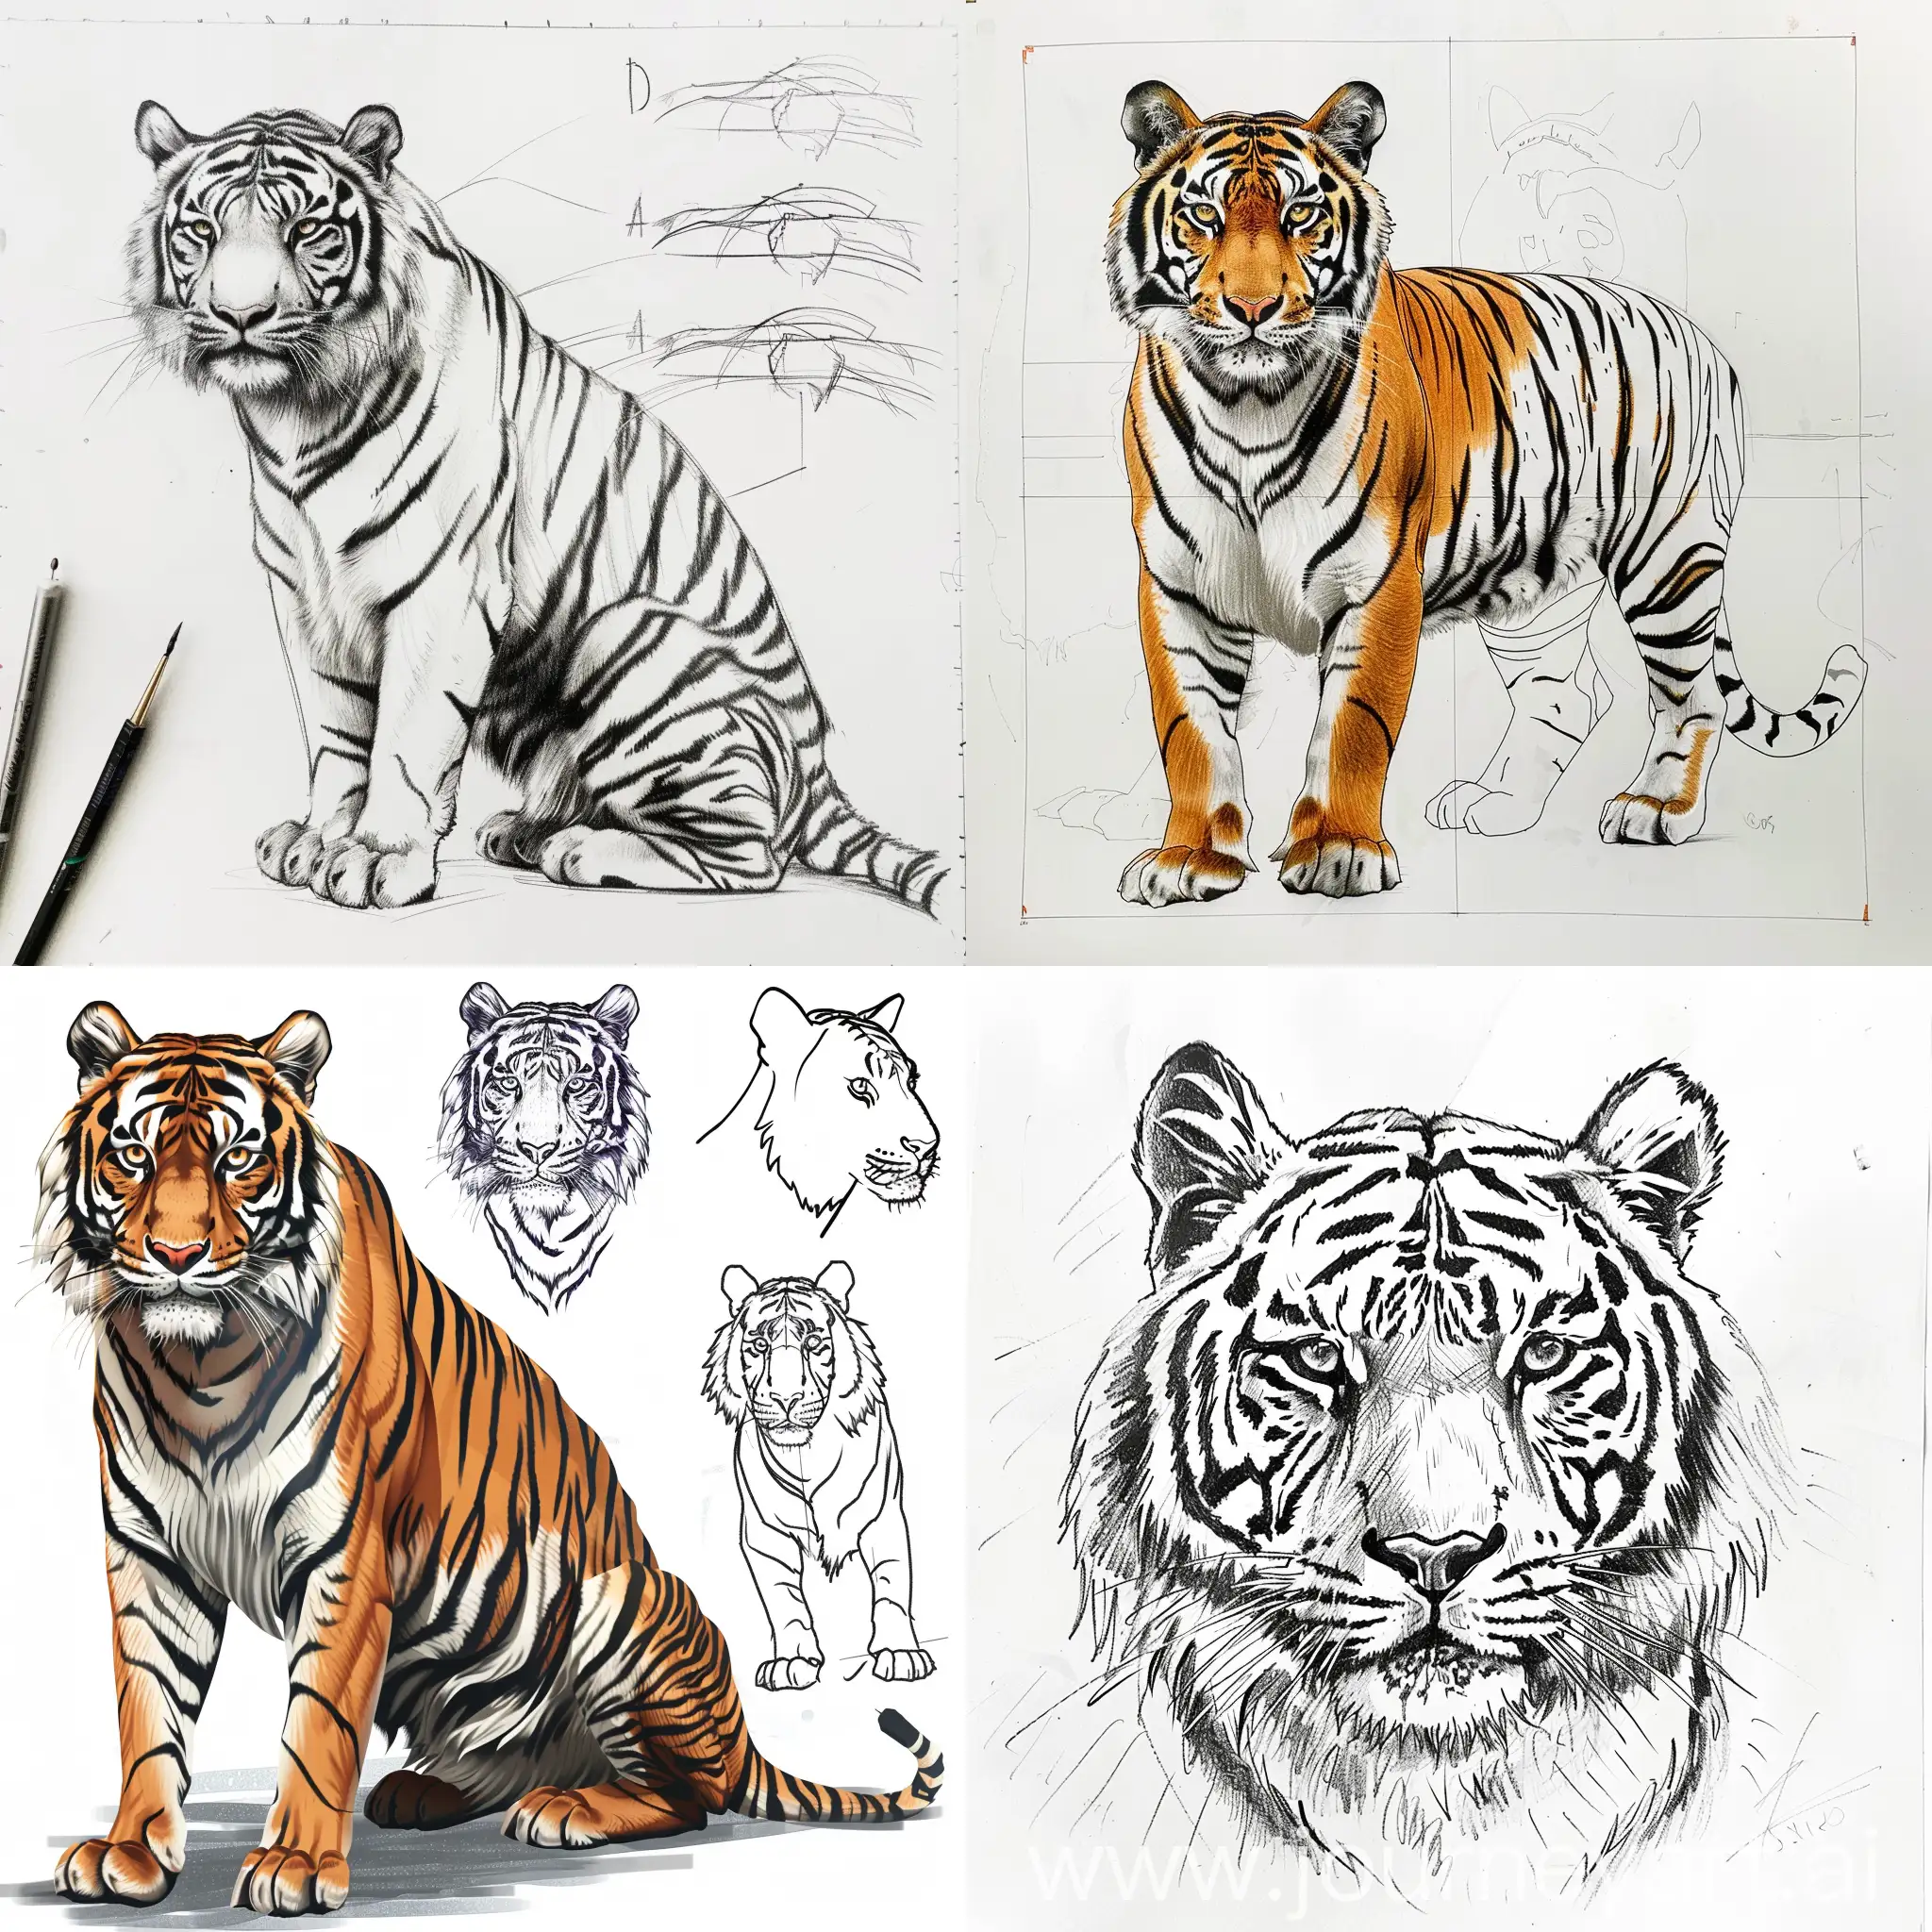 How to draw tiger anatomy, drawing class, from simple shape to complex fur, how to think when you draw with Lorenzo style, 